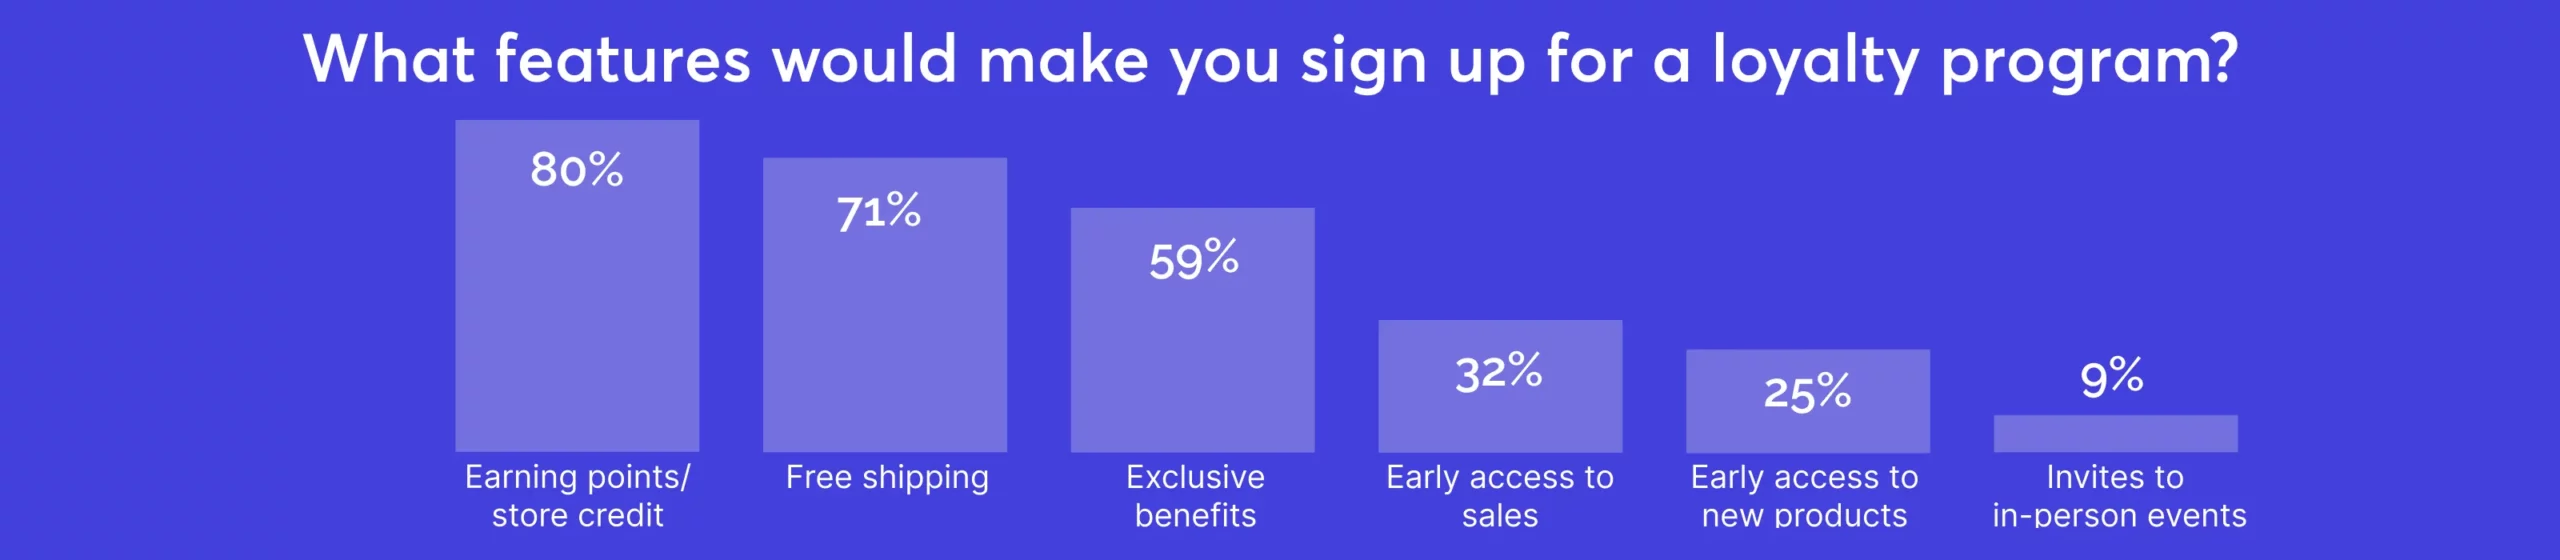 Features that make consumers want to sign up for a loyalty program